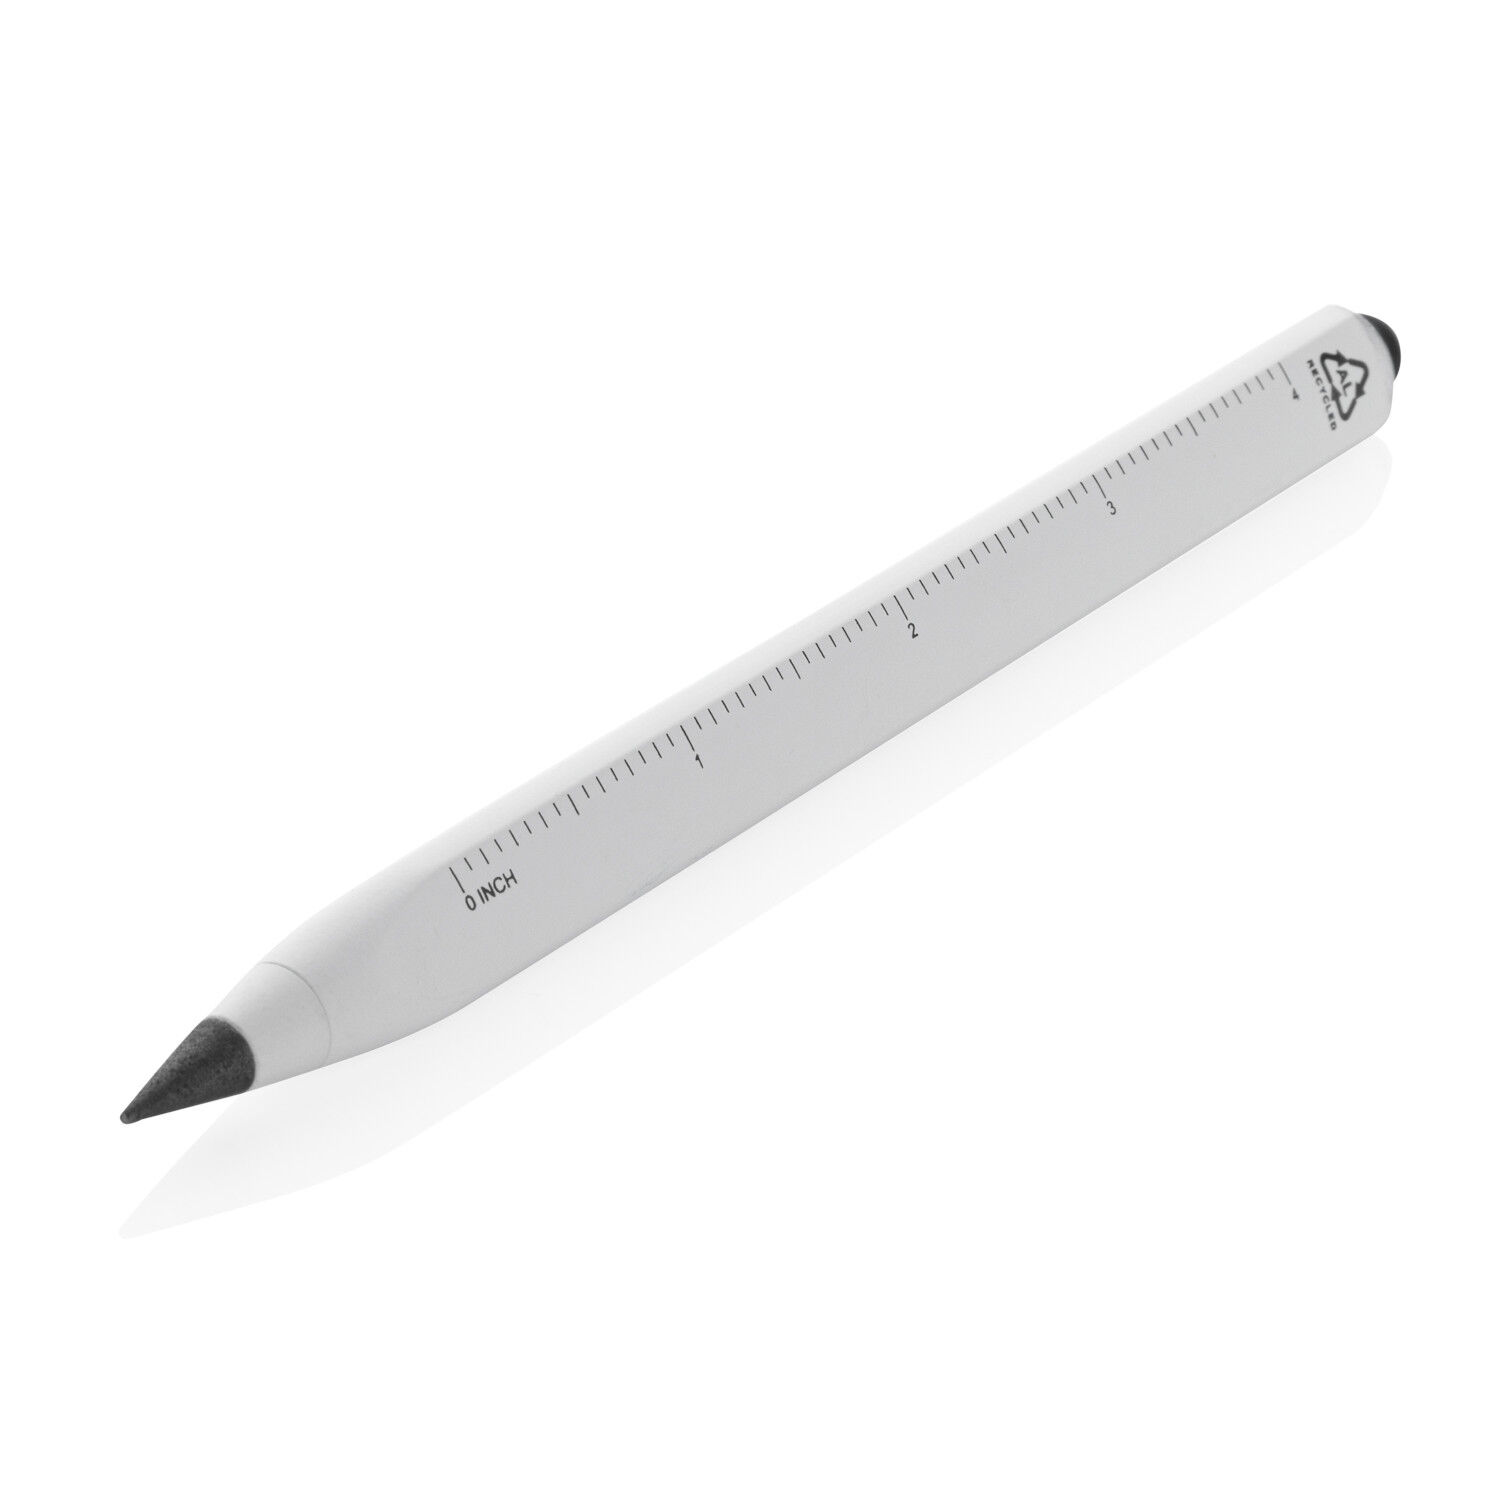 Eon Infinity Multifunction Pen (imperial / inches)